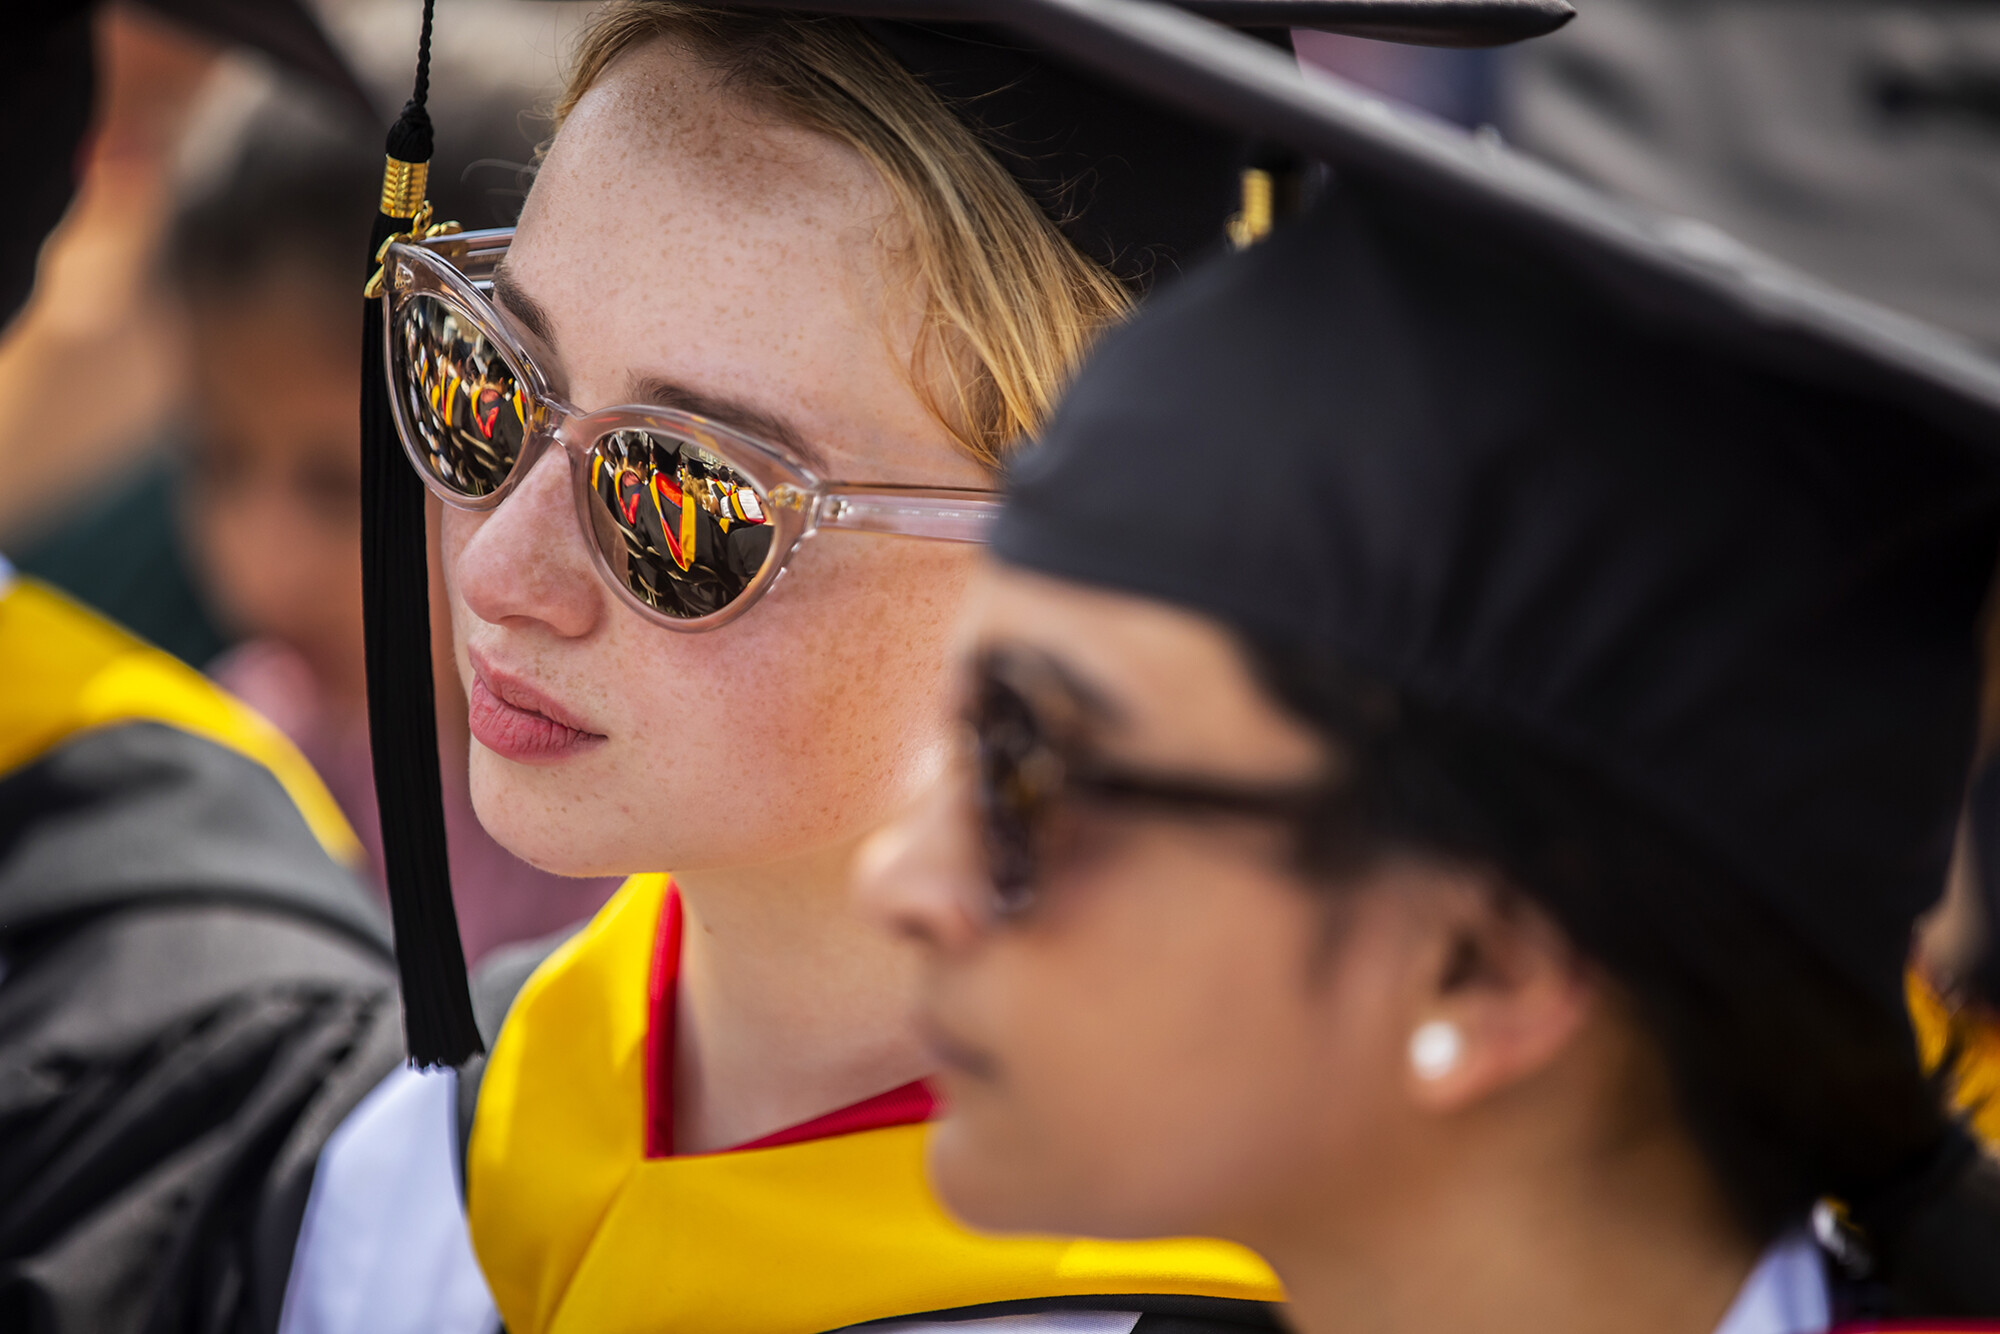 Graduate in sunglasses seated with reflection of other graduates in sunglasses.